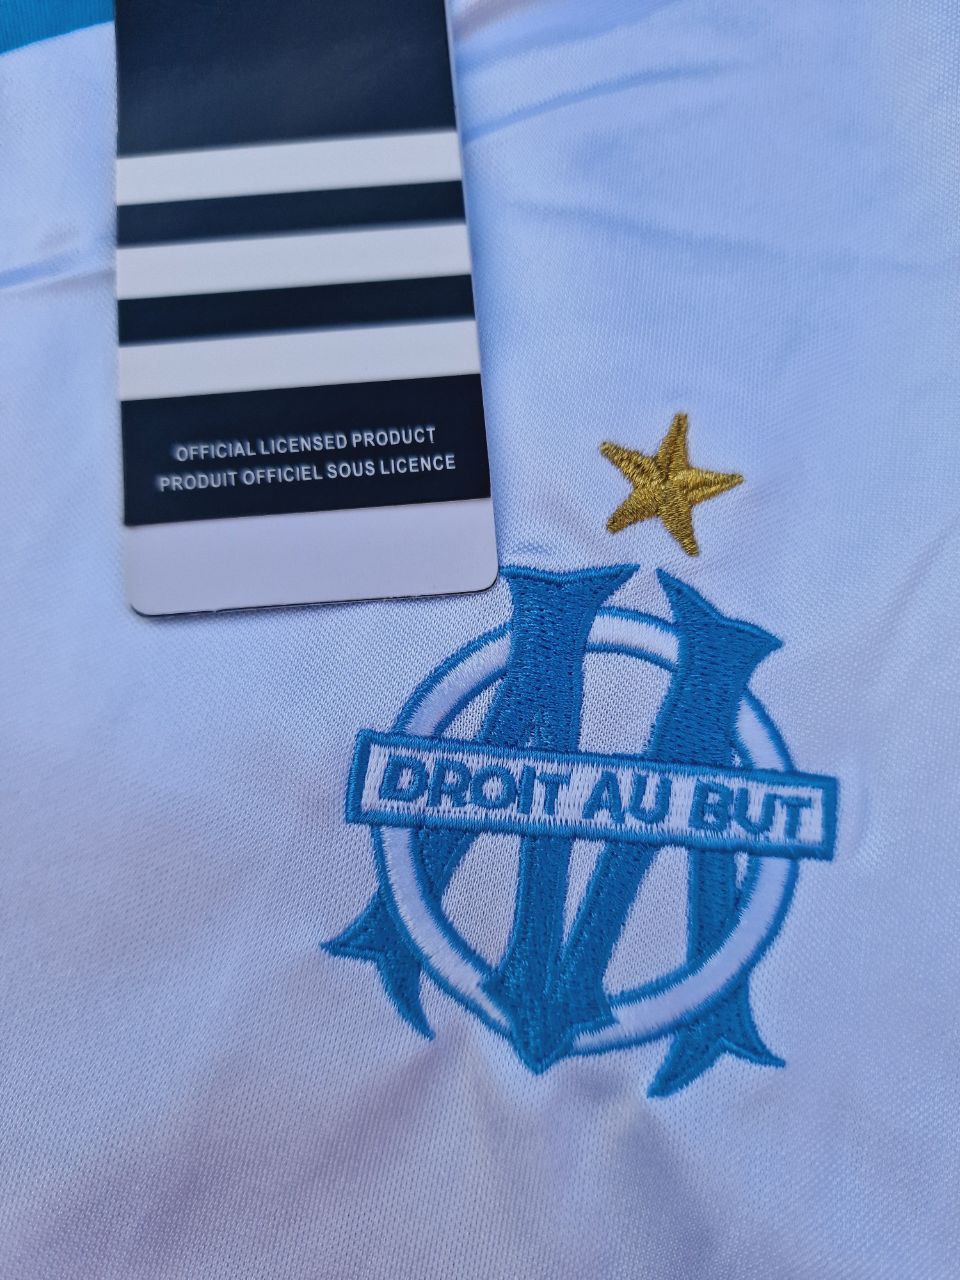 Olympique Marseille Didier Drogba 2003-04  Home No.11 Ligue 1 OM Football Jersey Maillot Henry